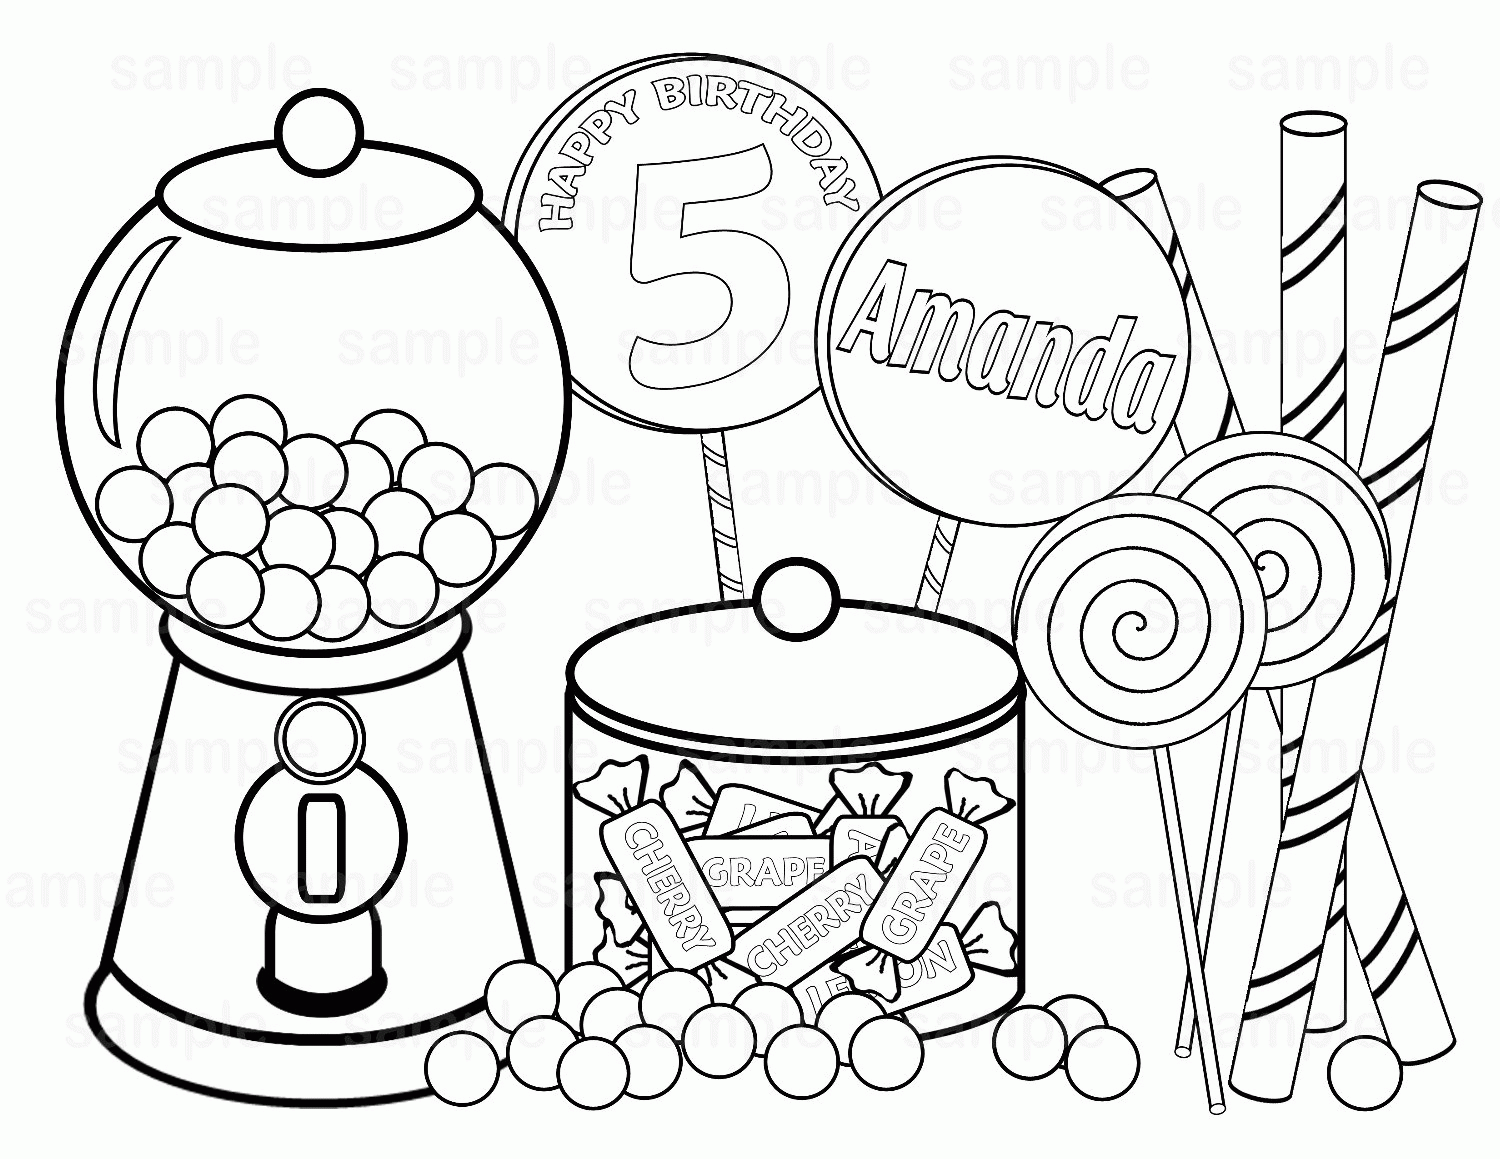 Coloring Pages : Coloringes Ncbggl7ai Candy Hard Halloween ...